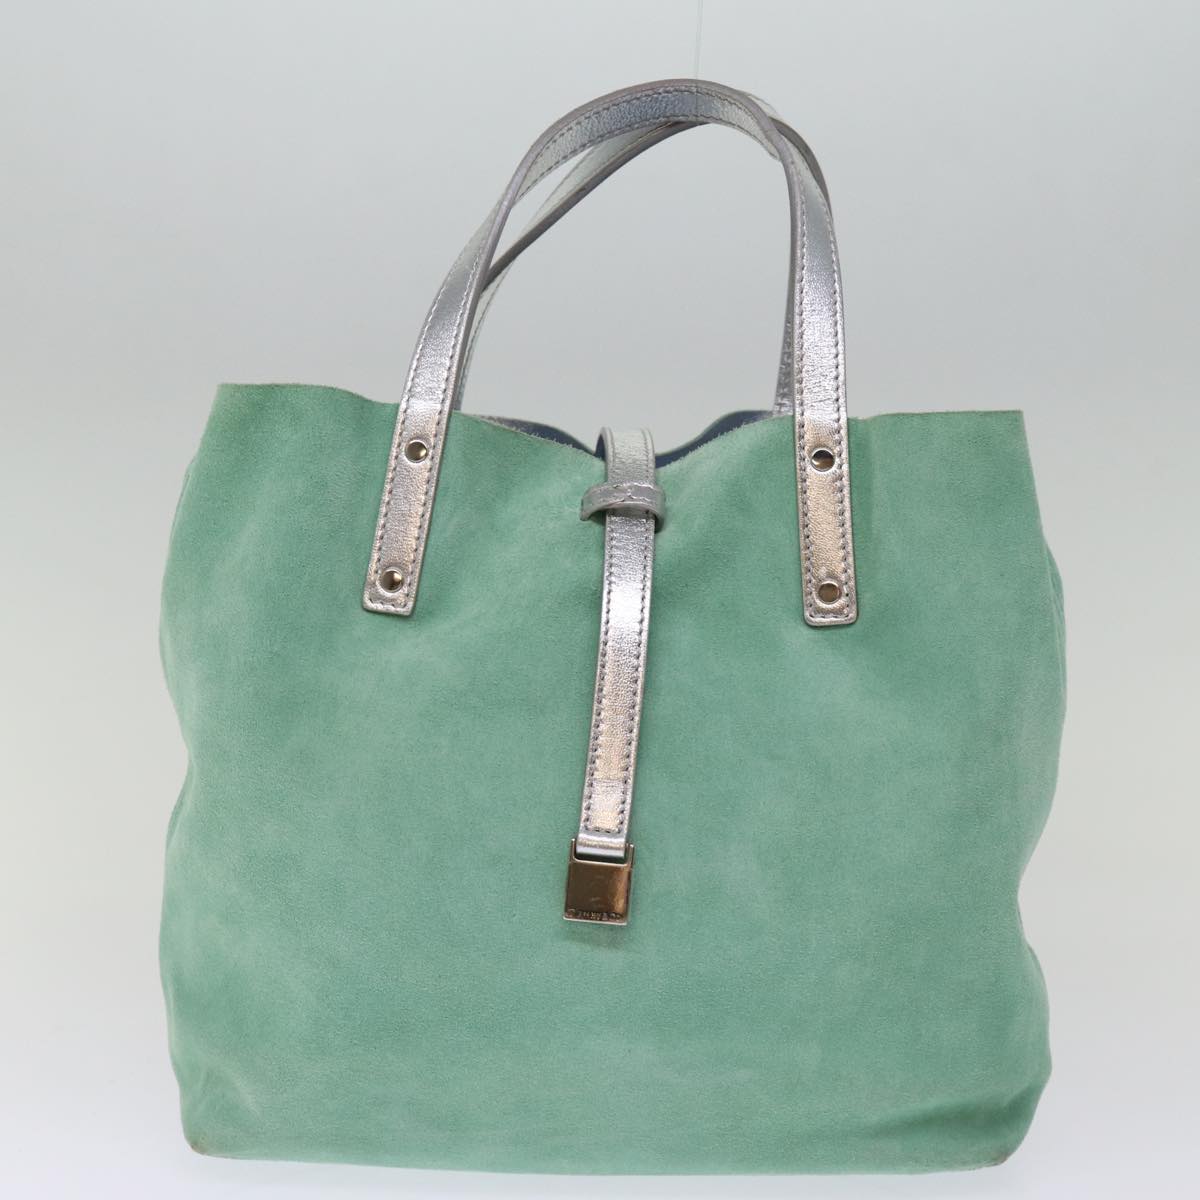 TIFFANY&Co. Hand Bag Suede Light Blue Auth 75135 - 0